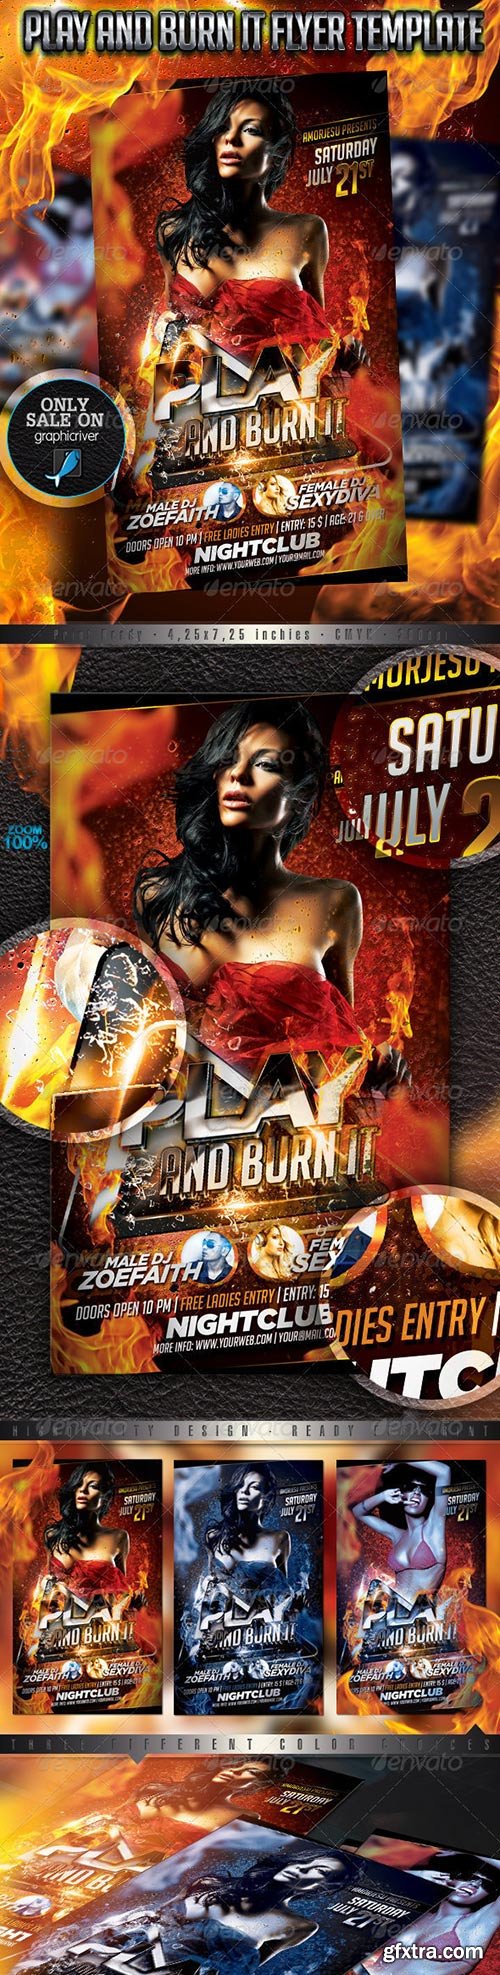 GraphicRiver - Play And Burn It Flyer Template 2642382